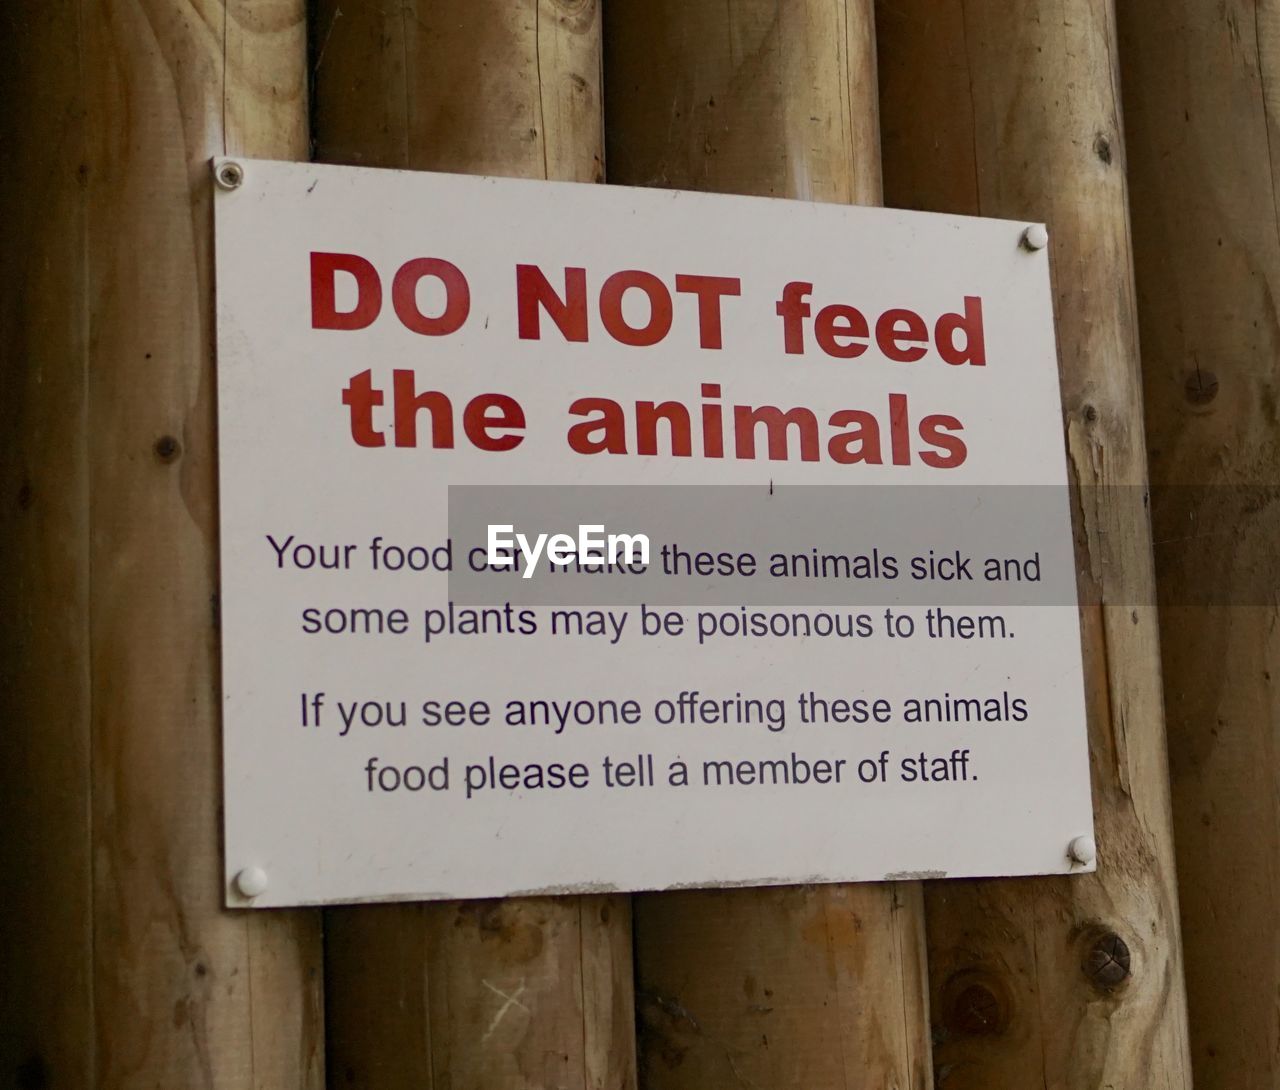 Do not feed the animals.